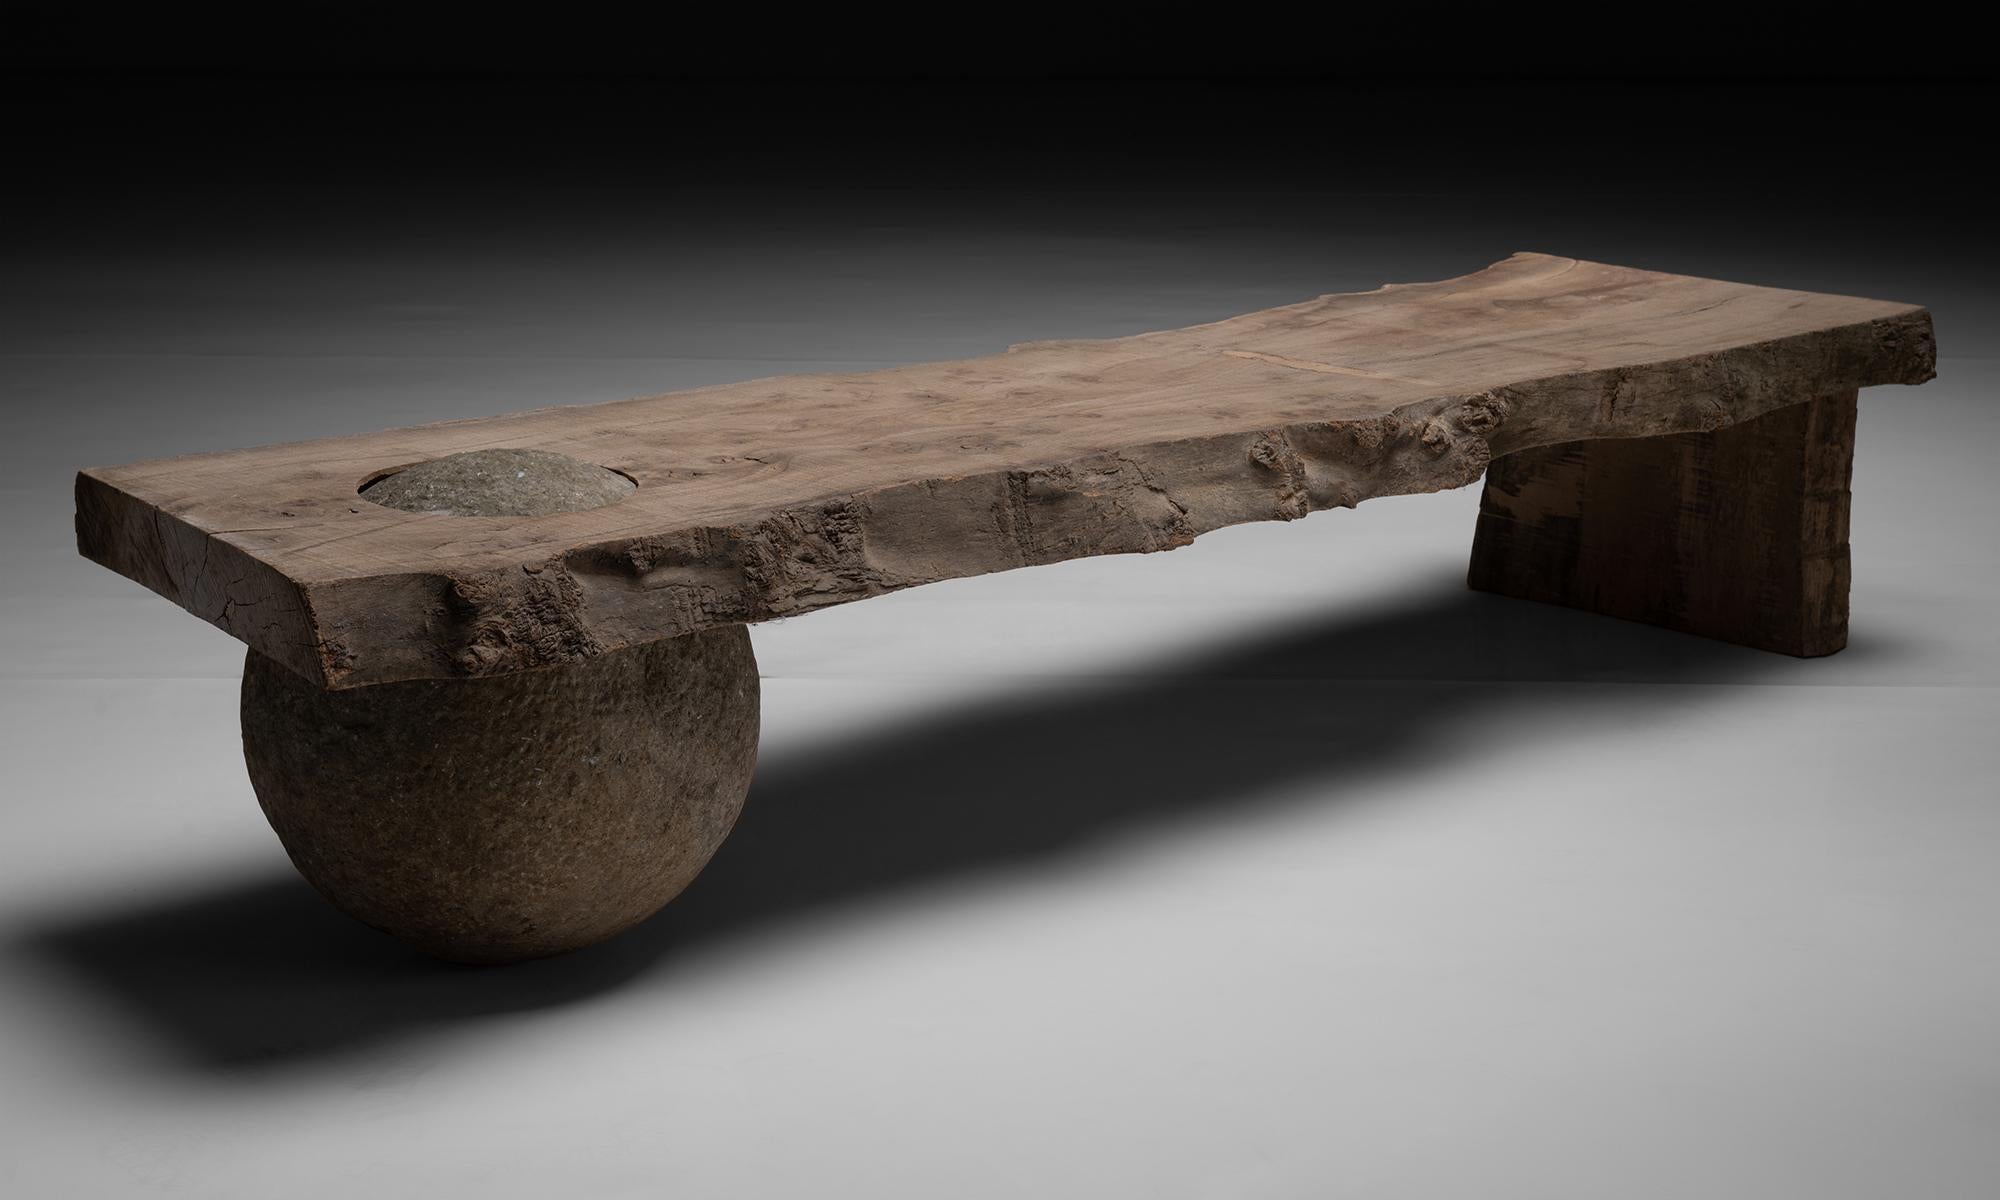 Primitive Concrete Ball & Slab Coffee Table

France circa 1950

Composed coffee table with slab top on 15th century stone ball

Measures 78”L x 22.5”d x 15.5”h




